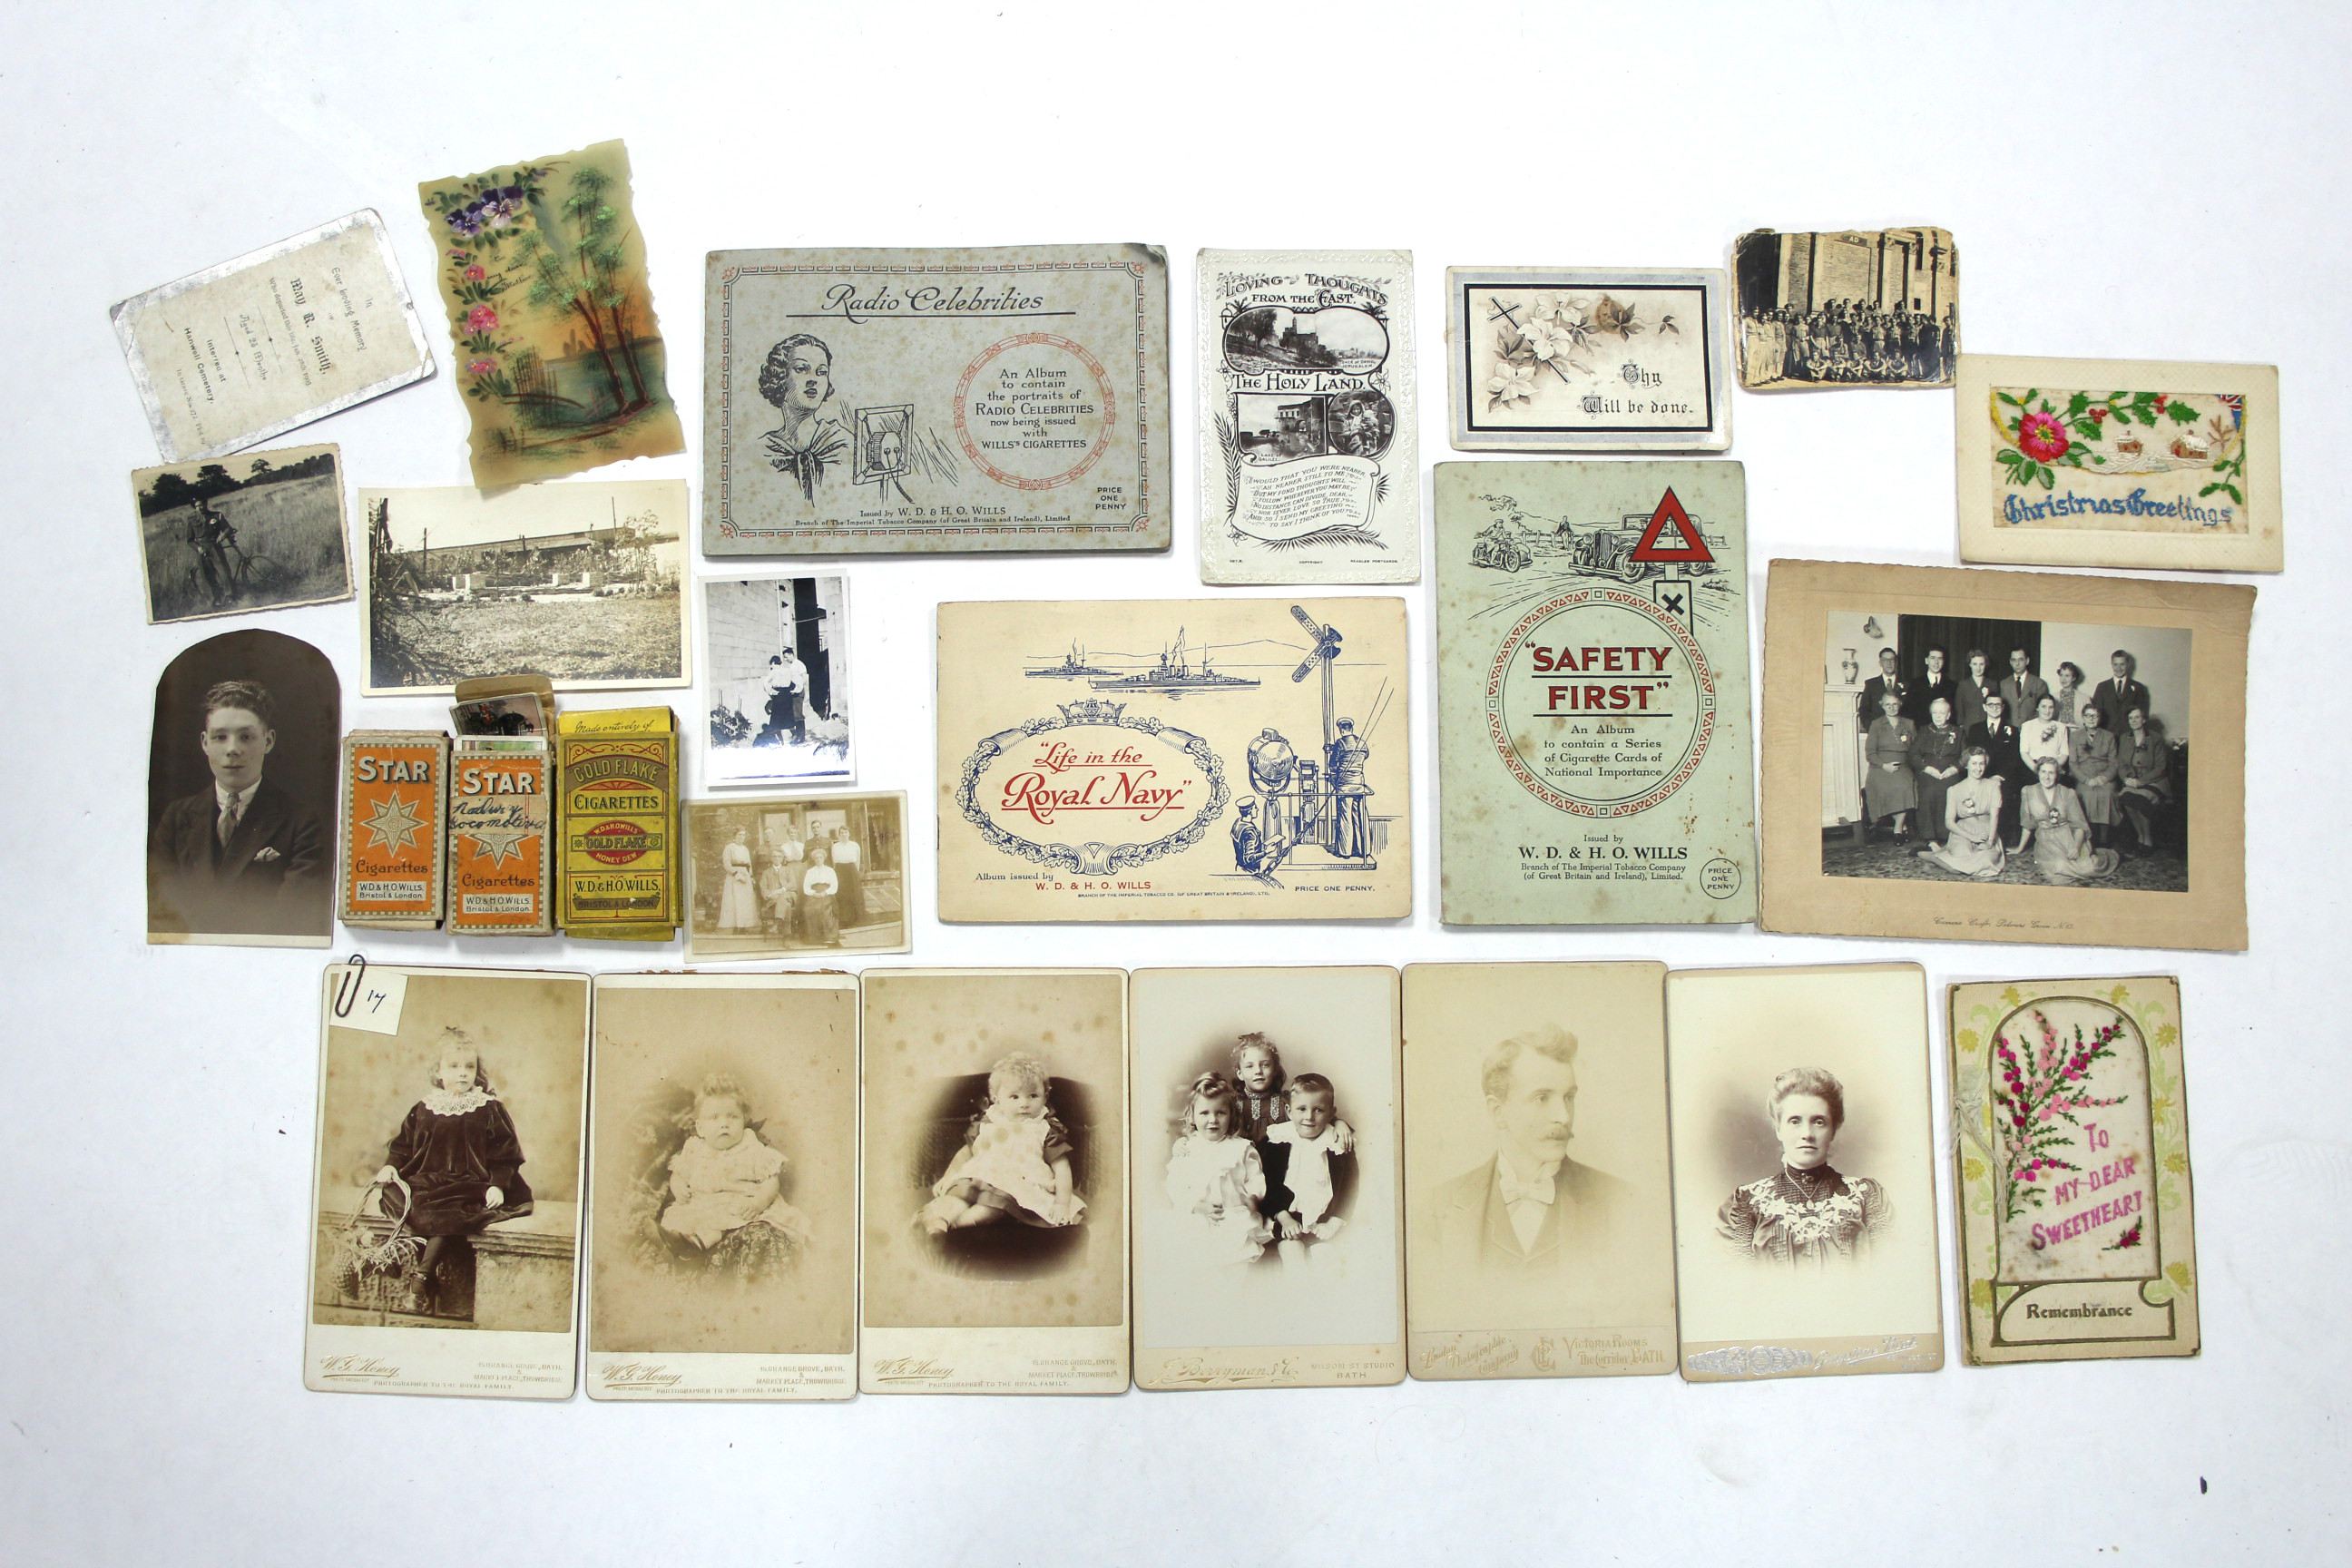 Six late 19th/early 20th century portrait cabinet cards each taken by a bath photographer,